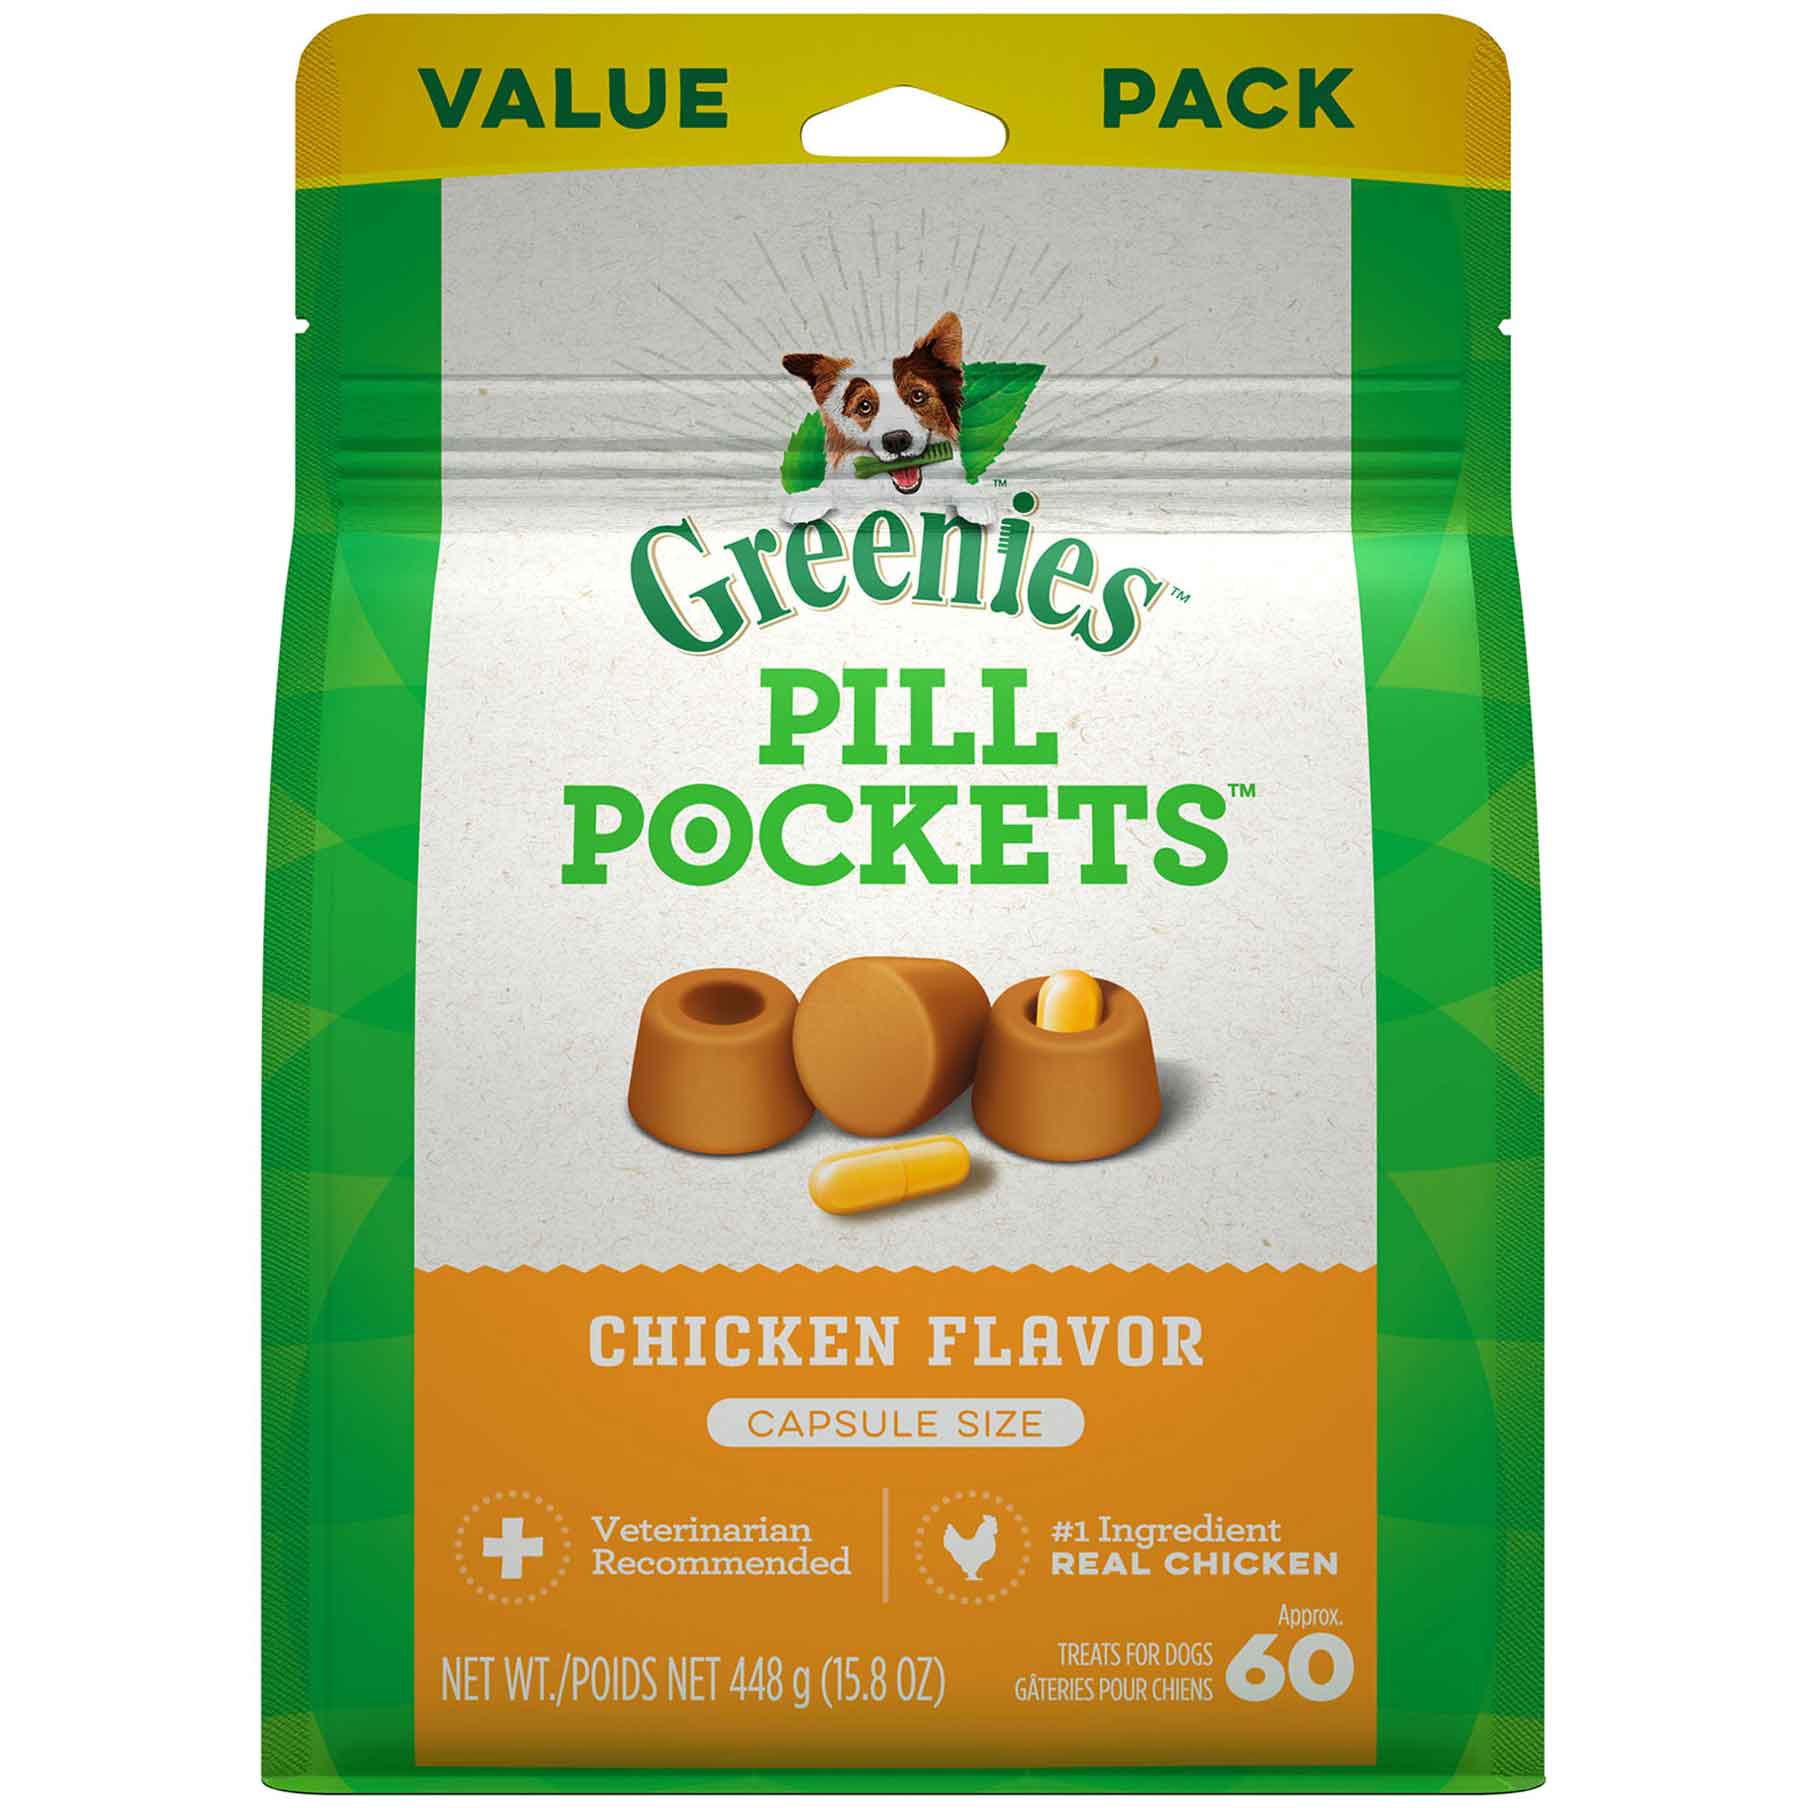 GREENIES PILL POCKETS Capsule Size Natural Dog Treats Chicken Flavor, 15.8 Ounce Value Pack (60 Treats)